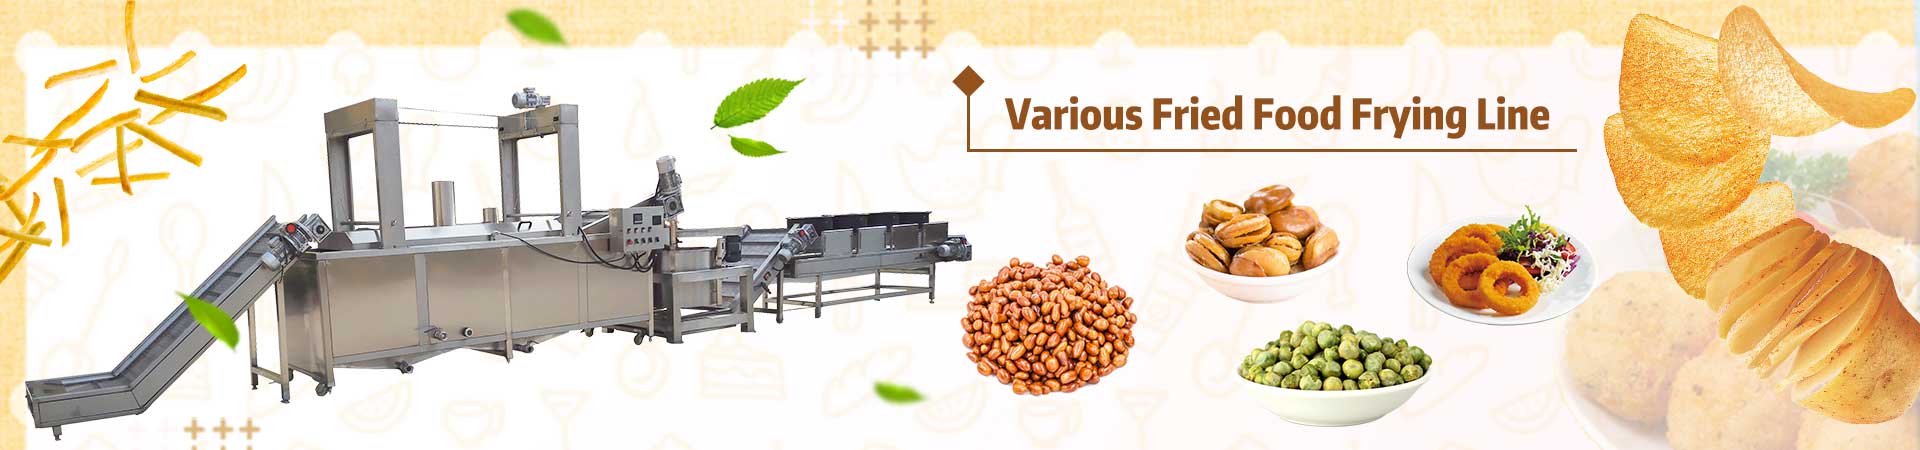 Various Fried Food Frying Line